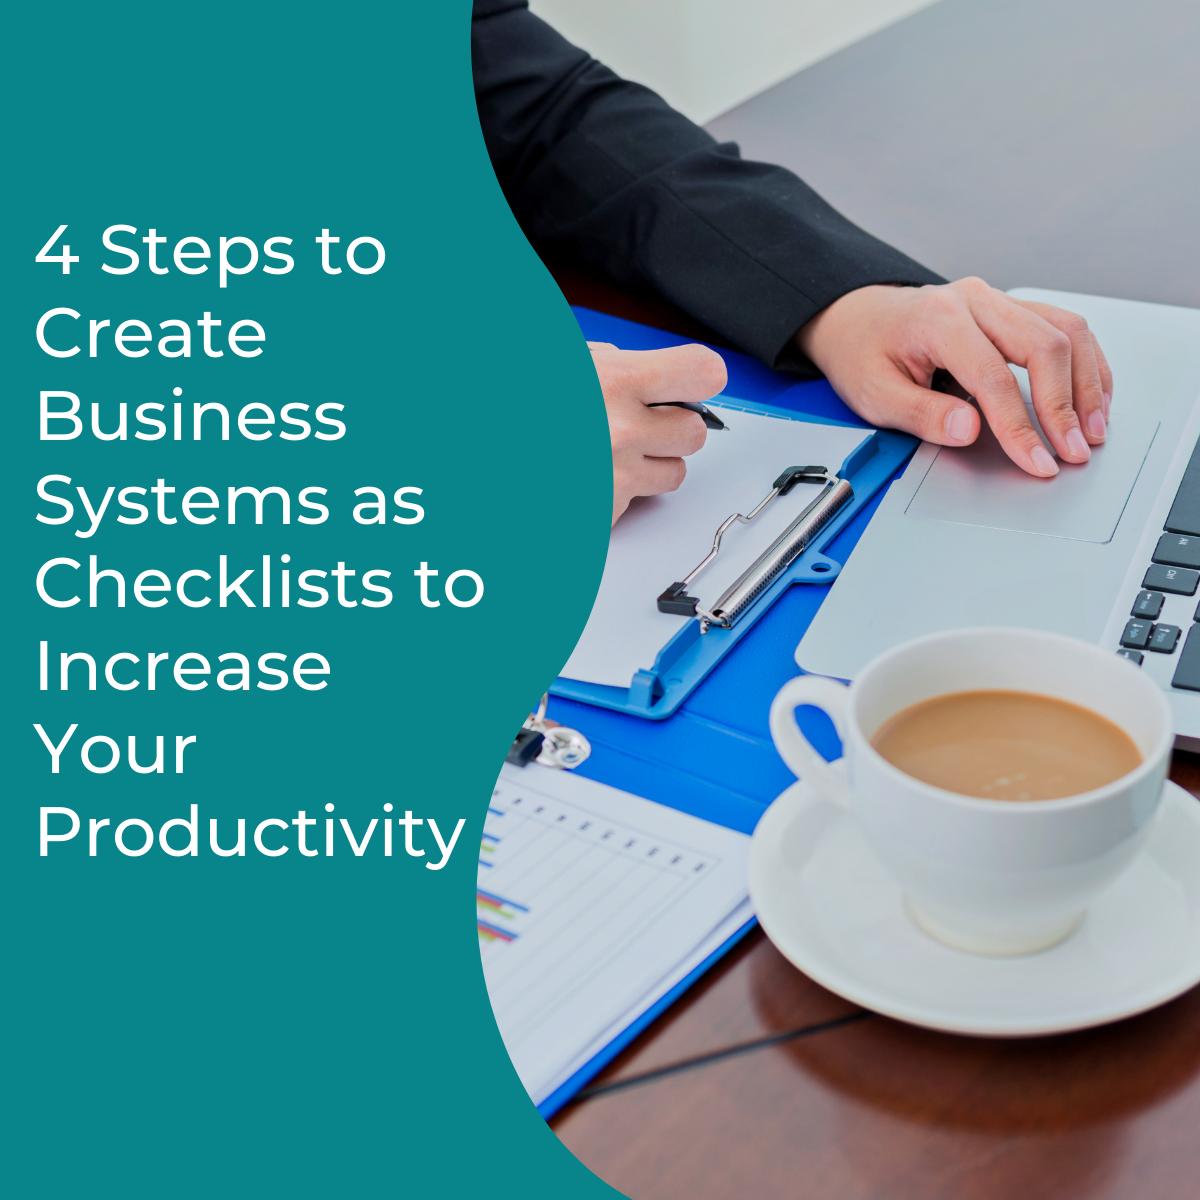 You are currently viewing 4 Steps to Create Business Systems as Checklists to Increase Your Productivity